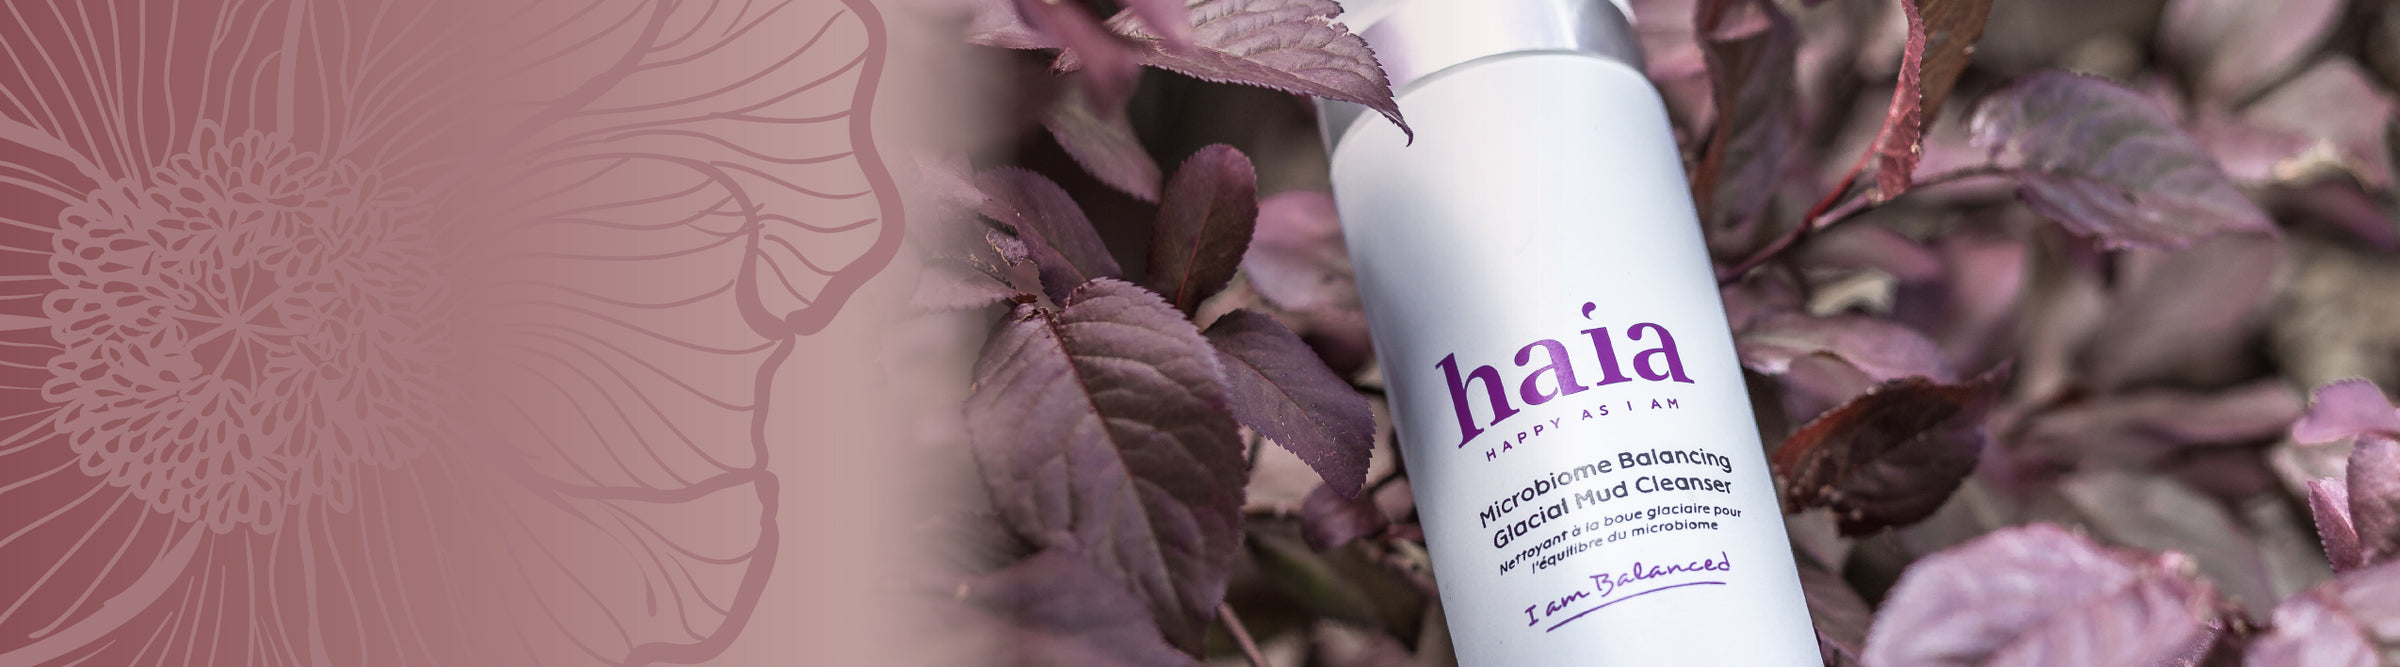 haia - Cleansers